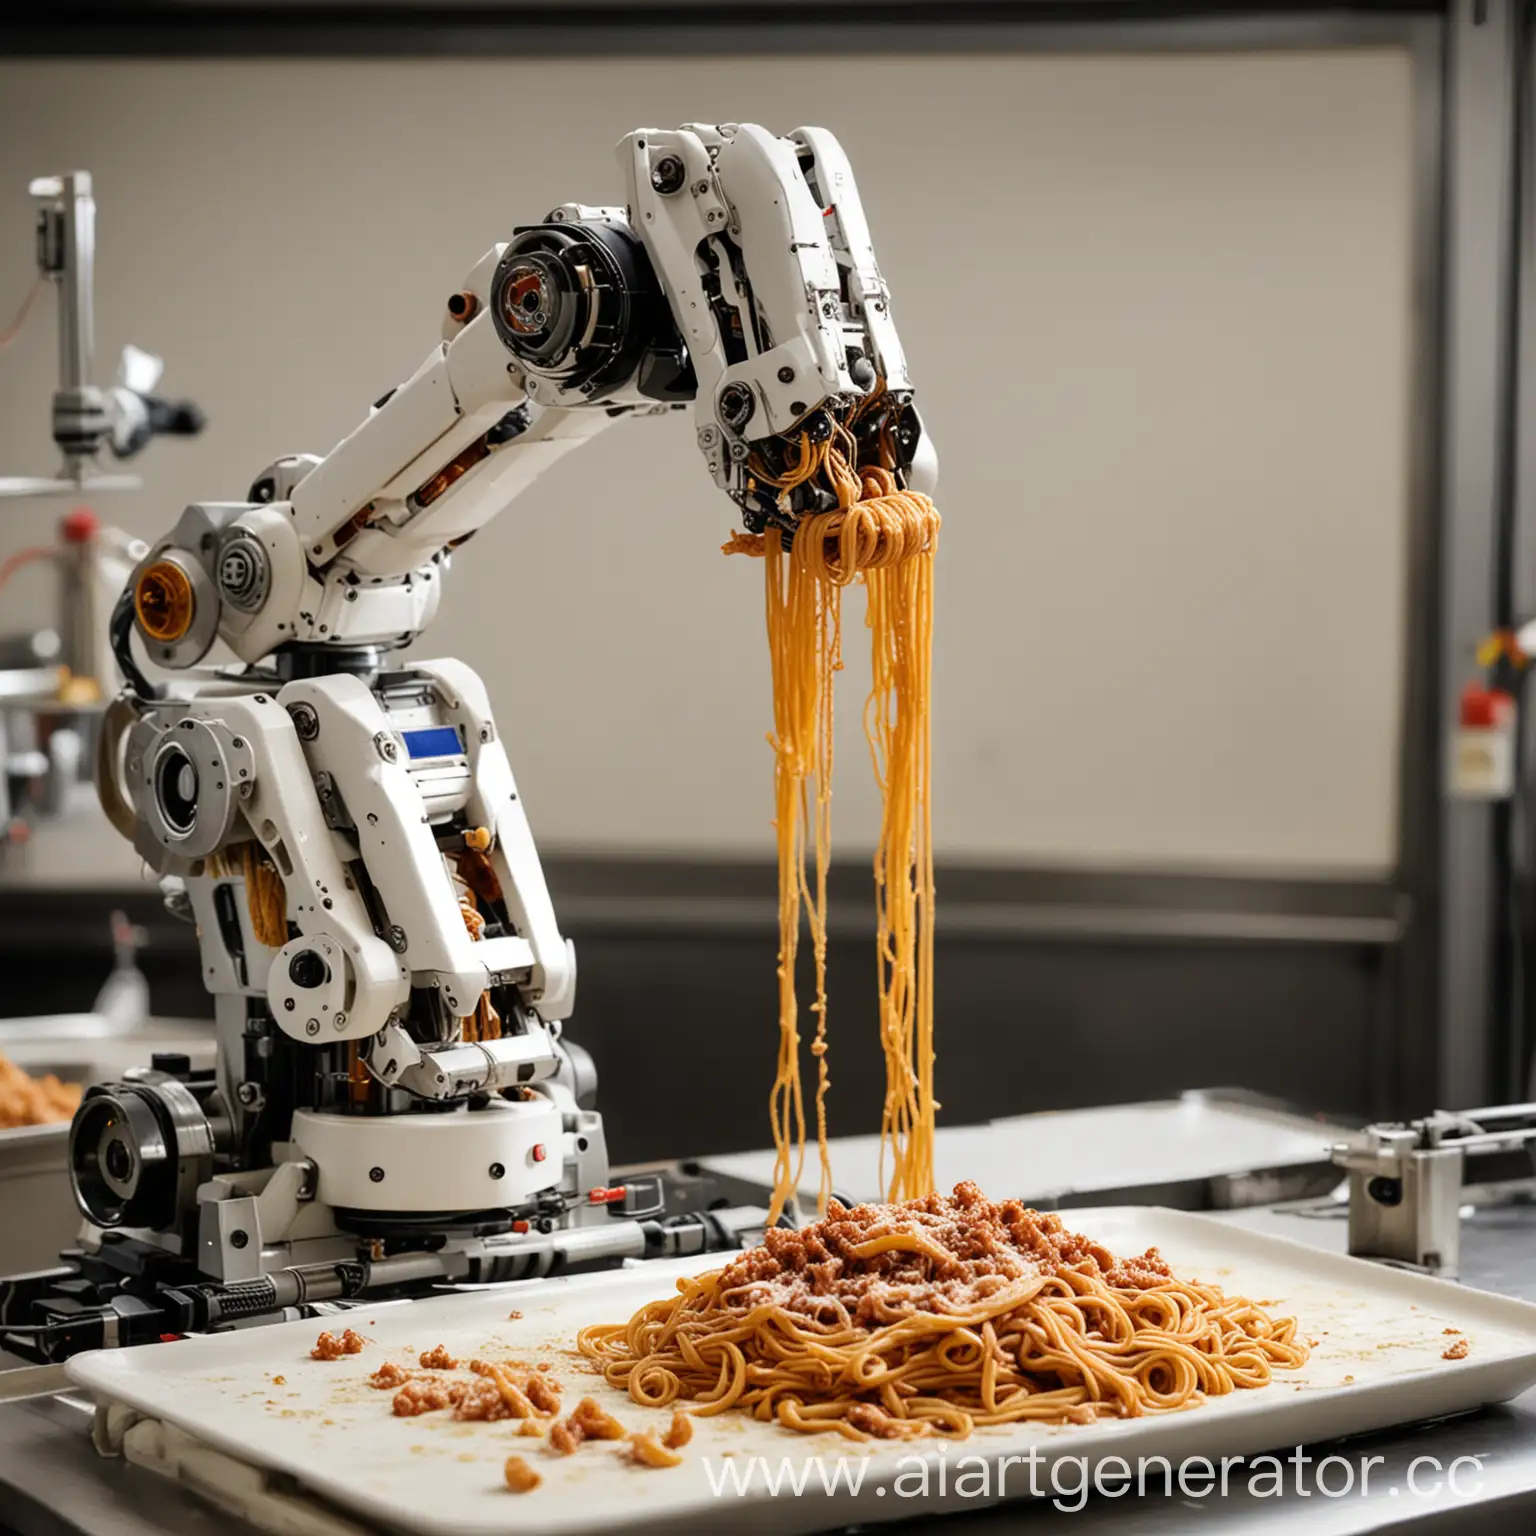 Robotic-Chef-Crafting-Pasta-Bolognese-with-SixJointed-Manipulator